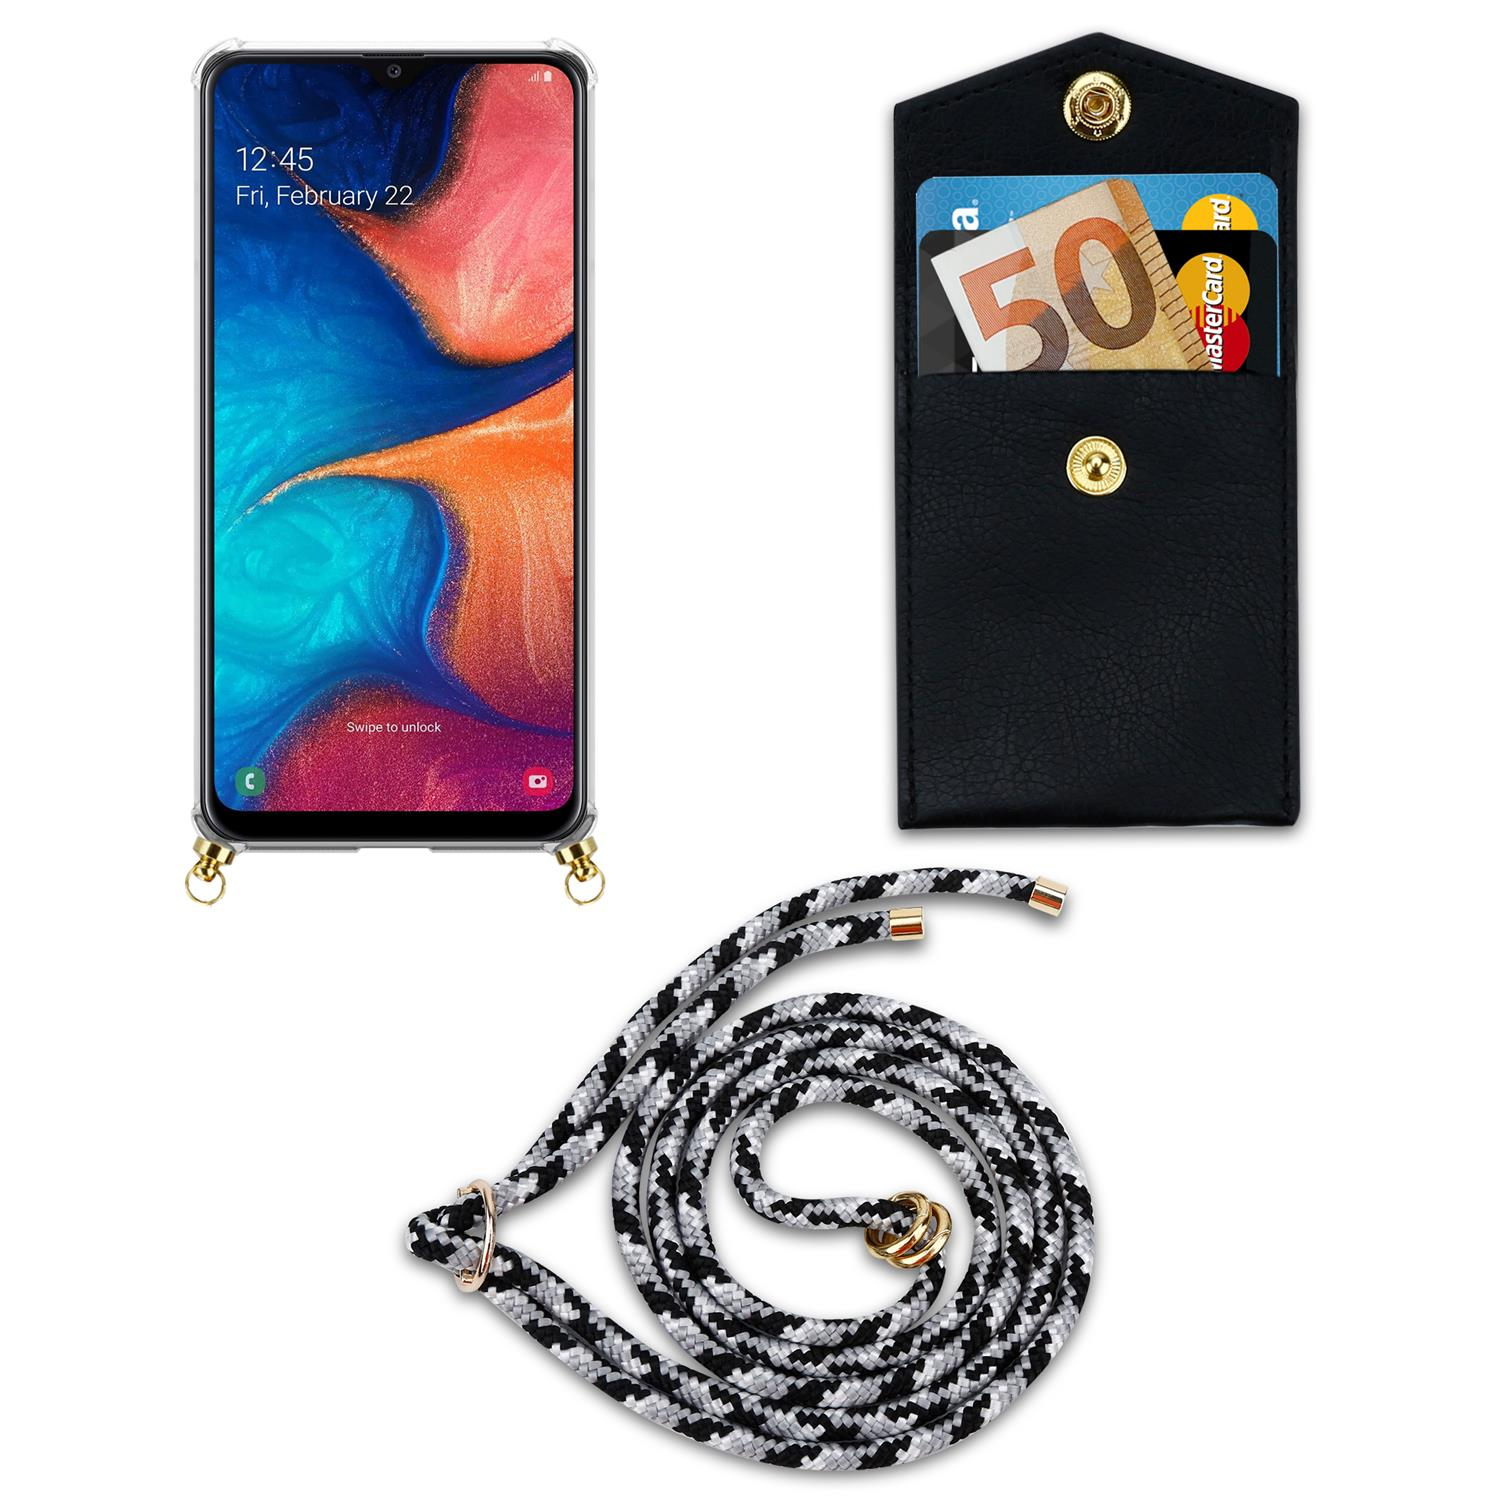 Ringen, CAMOUFLAGE Samsung, A30 Kordel Handy SCHWARZ A20 Kette / / Galaxy M10s, Hülle, Gold CADORABO abnehmbarer Band Backcover, mit und